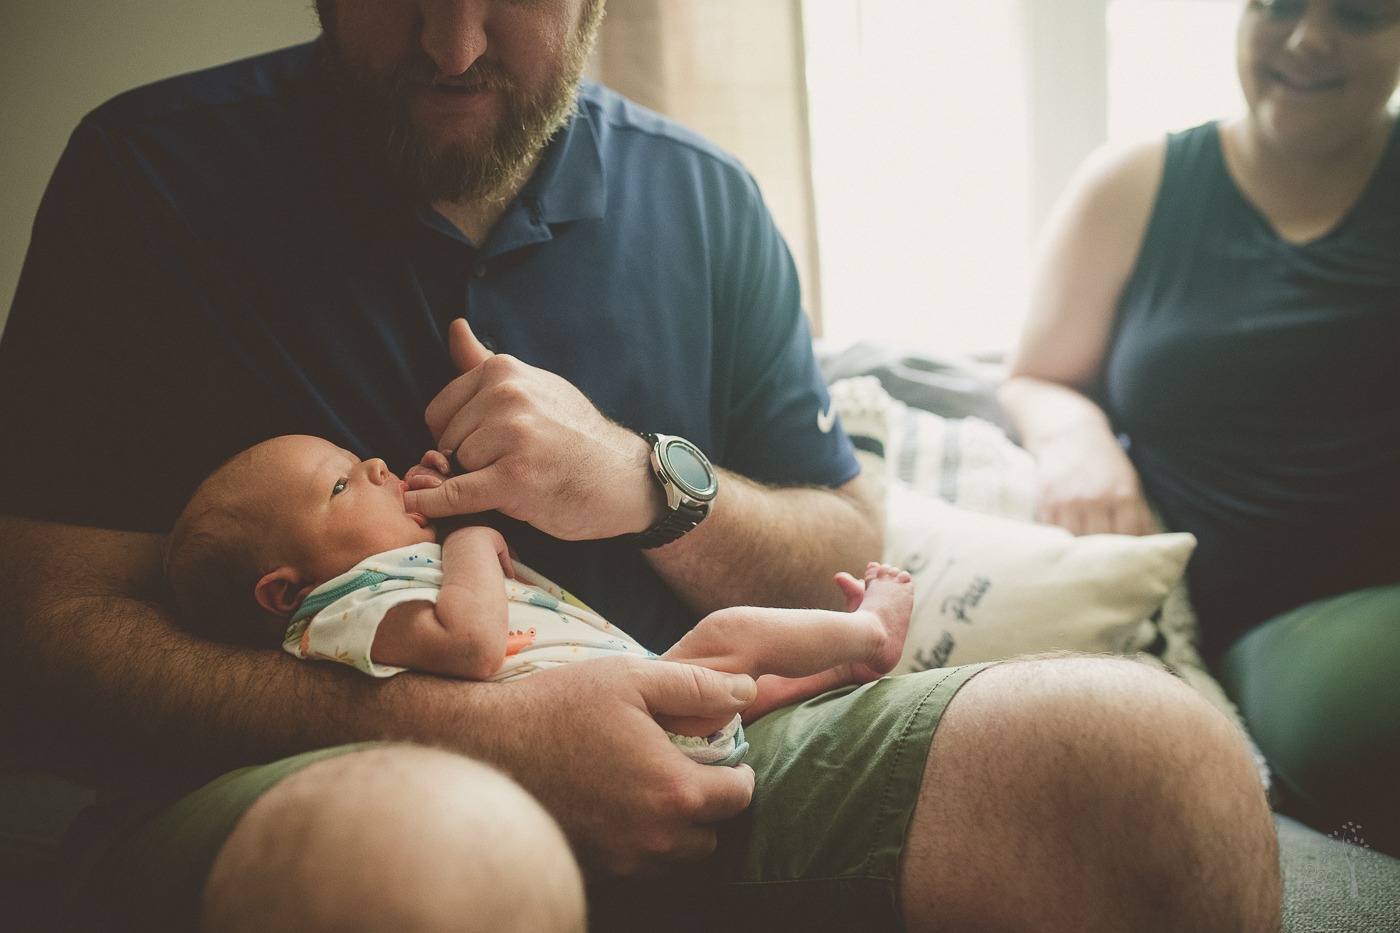 Newborn son sucking on his dad's pinky finger while being held by dad